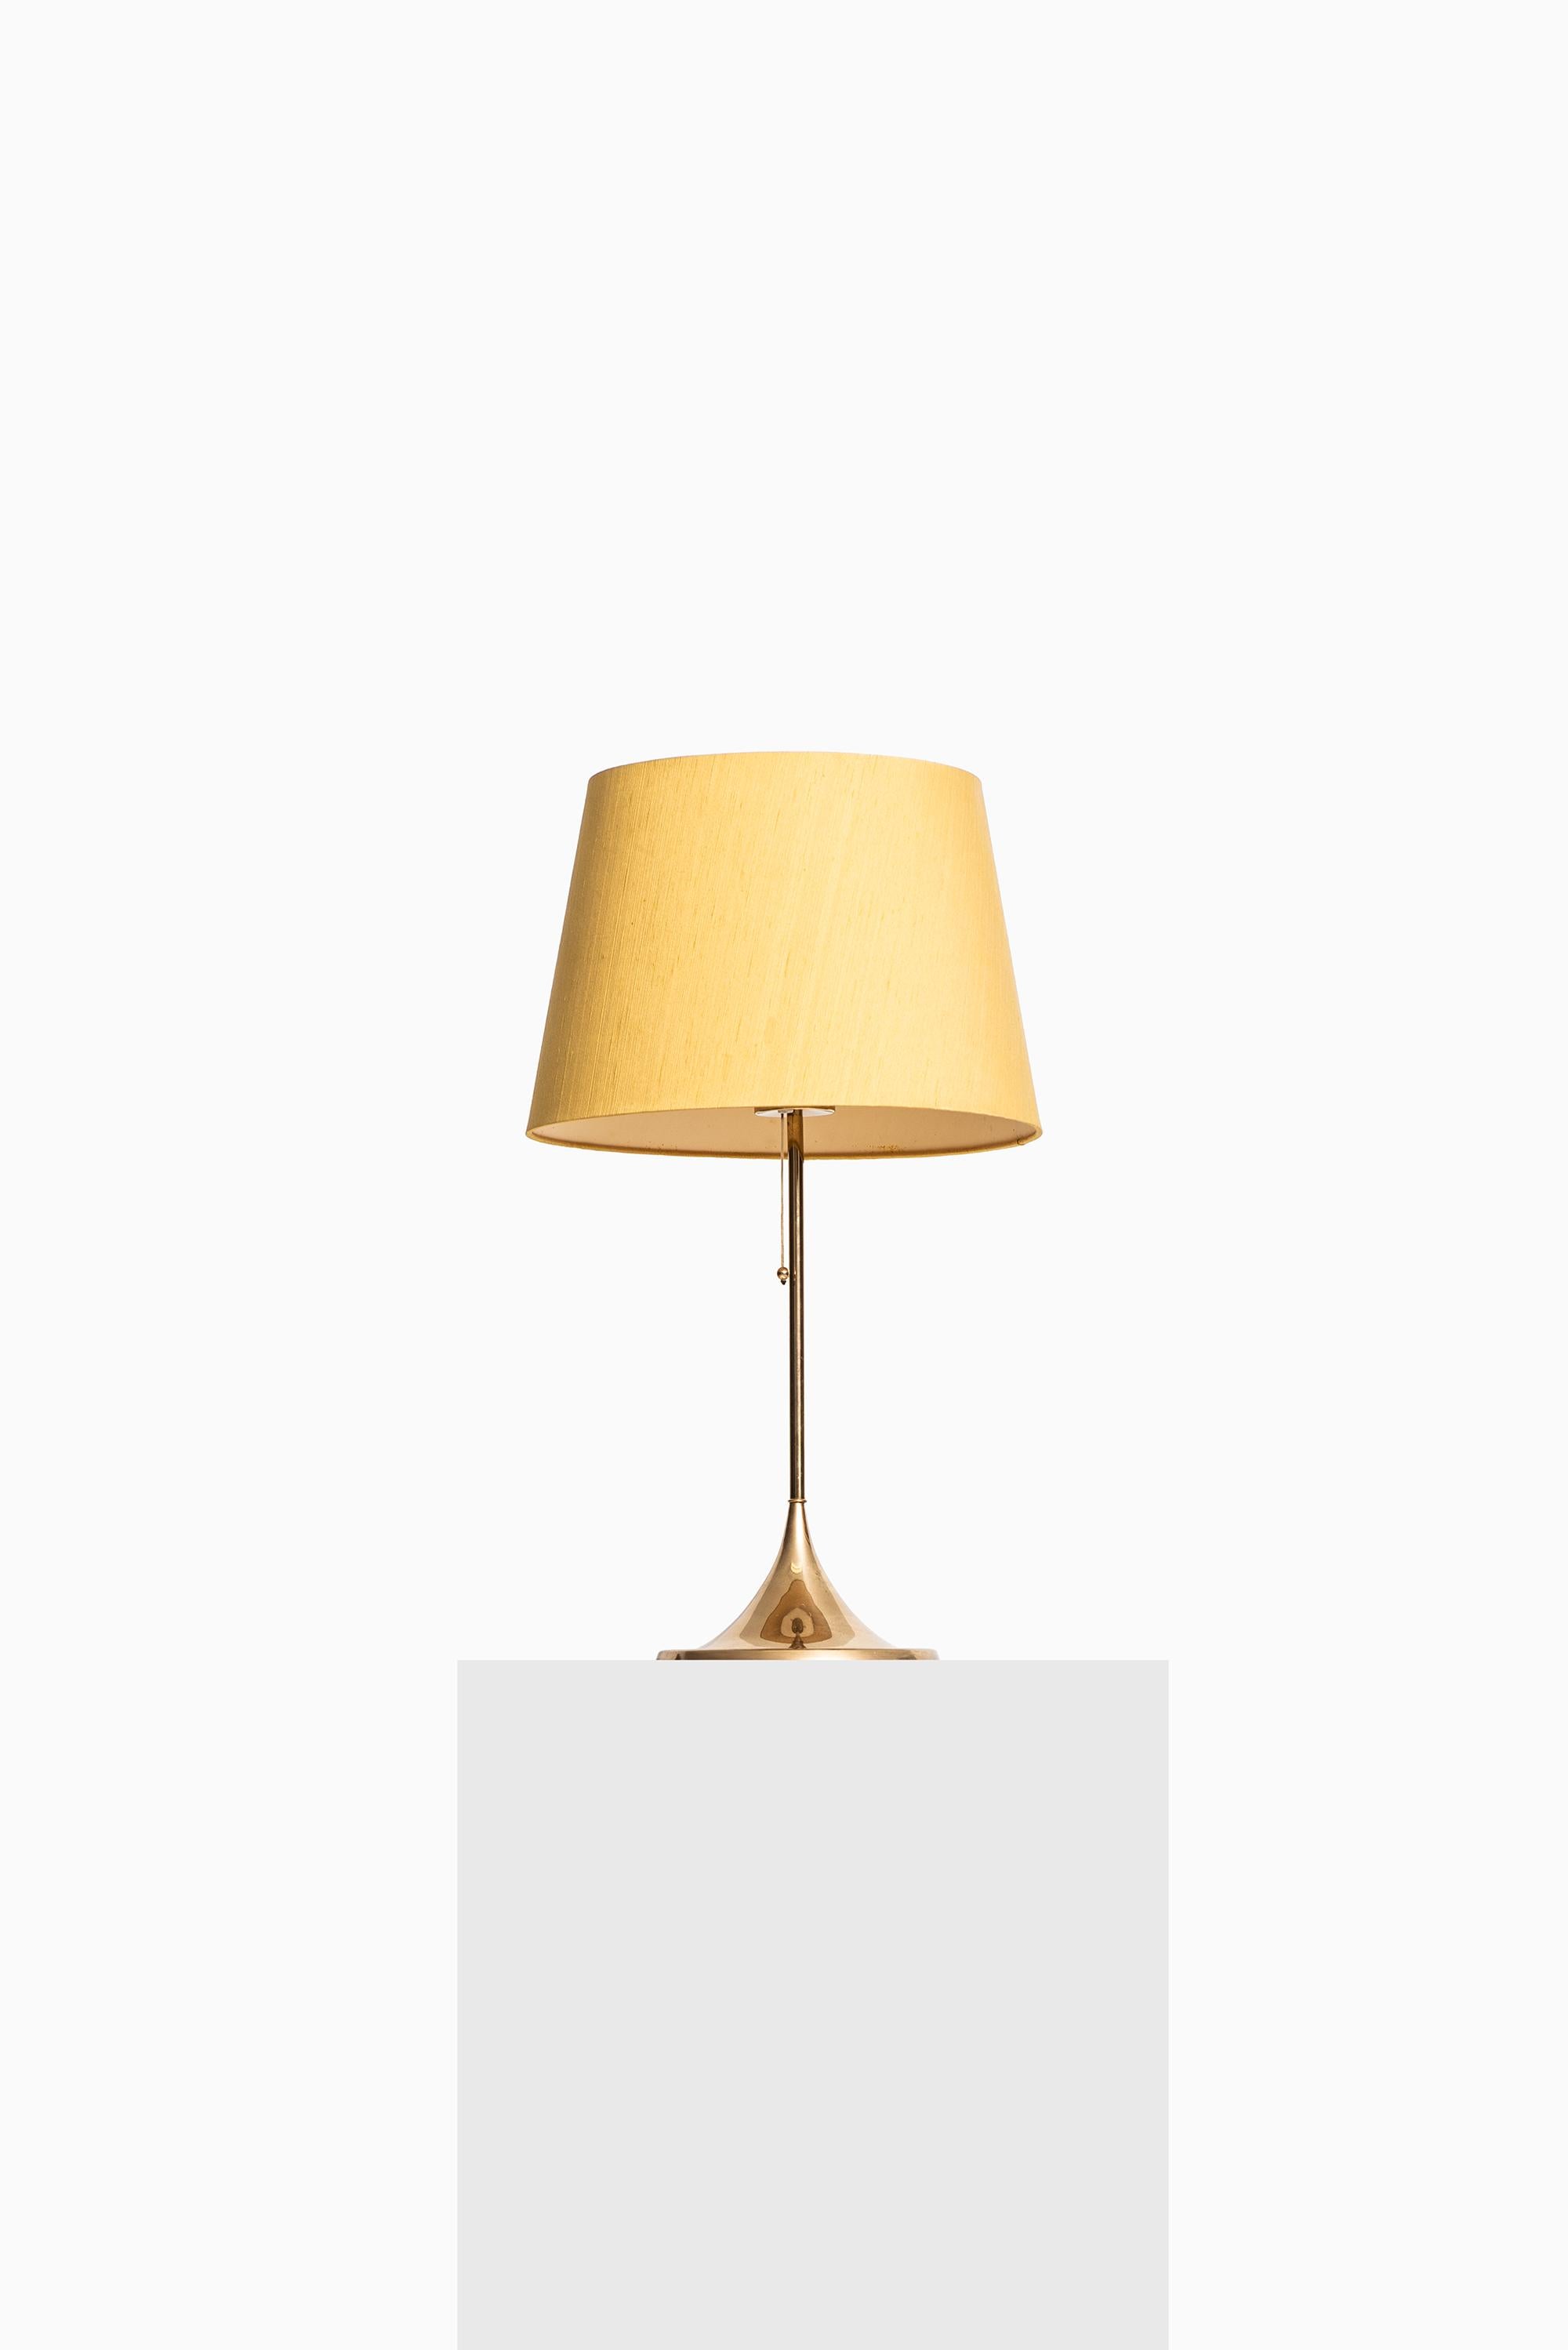 Pair of rare table lamps model B-024. Produced by Bergbom in Sweden.